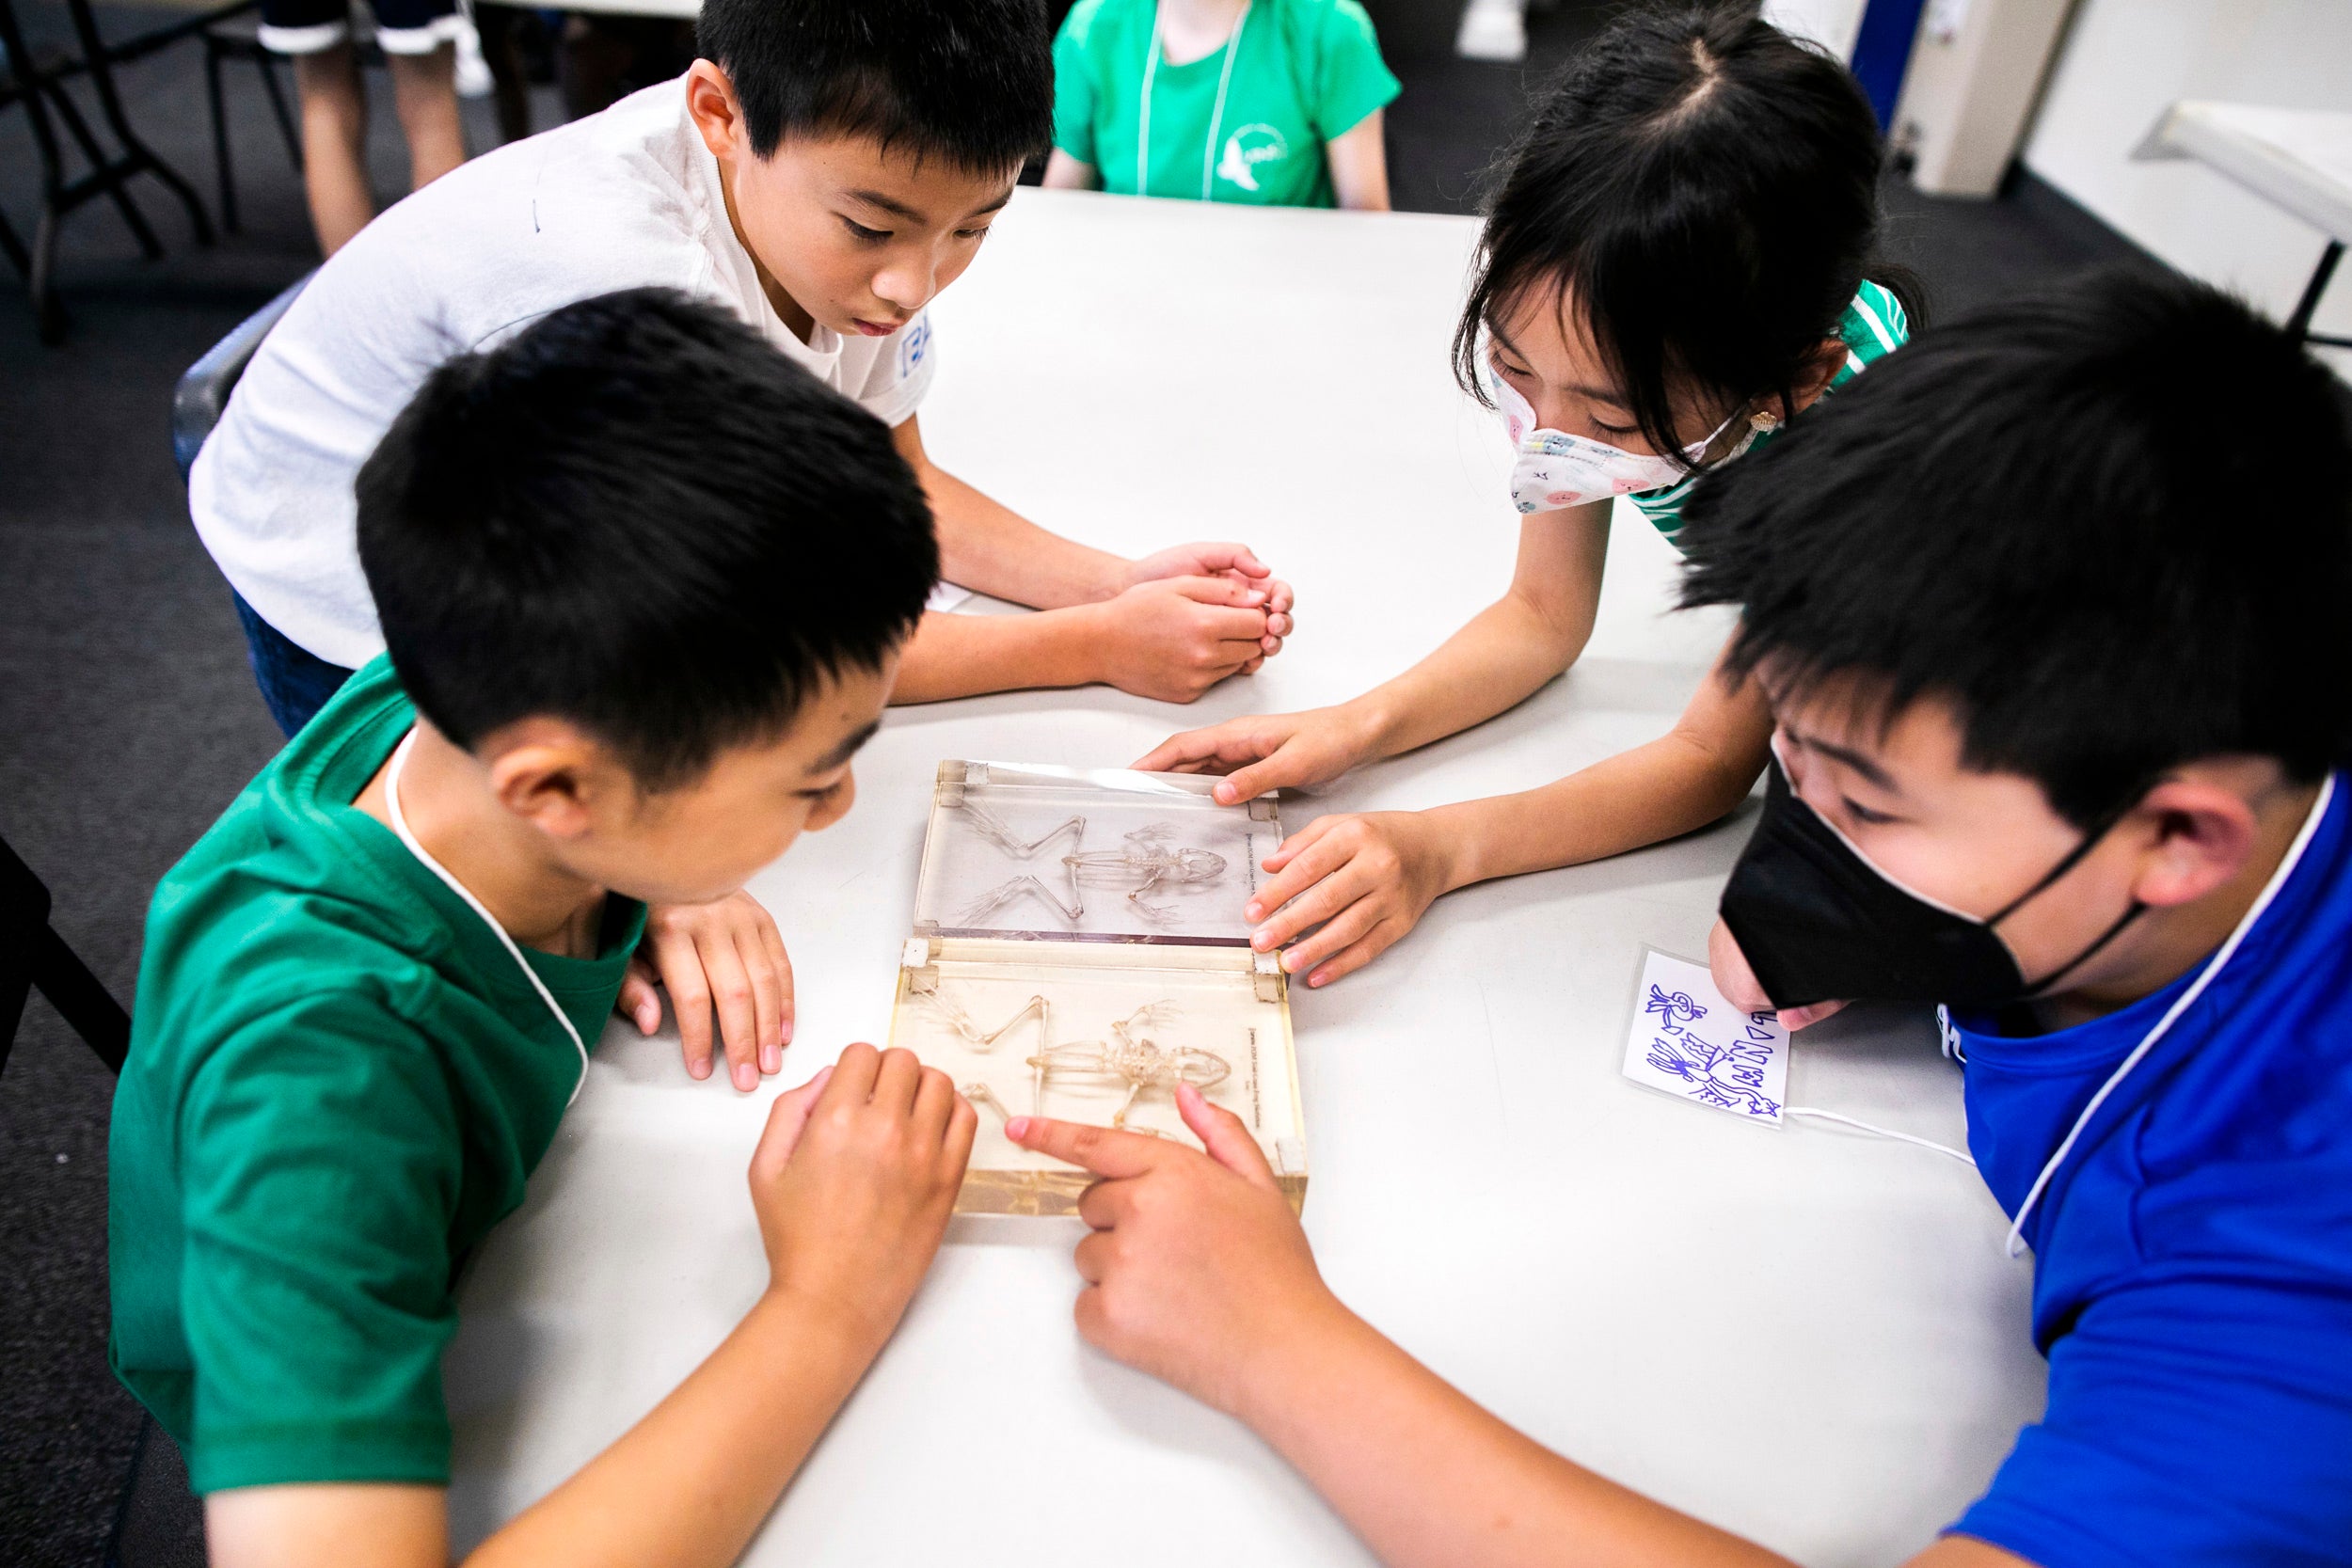 Maxwell Luo (clockwise from left), Raymond Wang, Michelle Luo, and Alan Wang examine skeleton samples in the classroom.